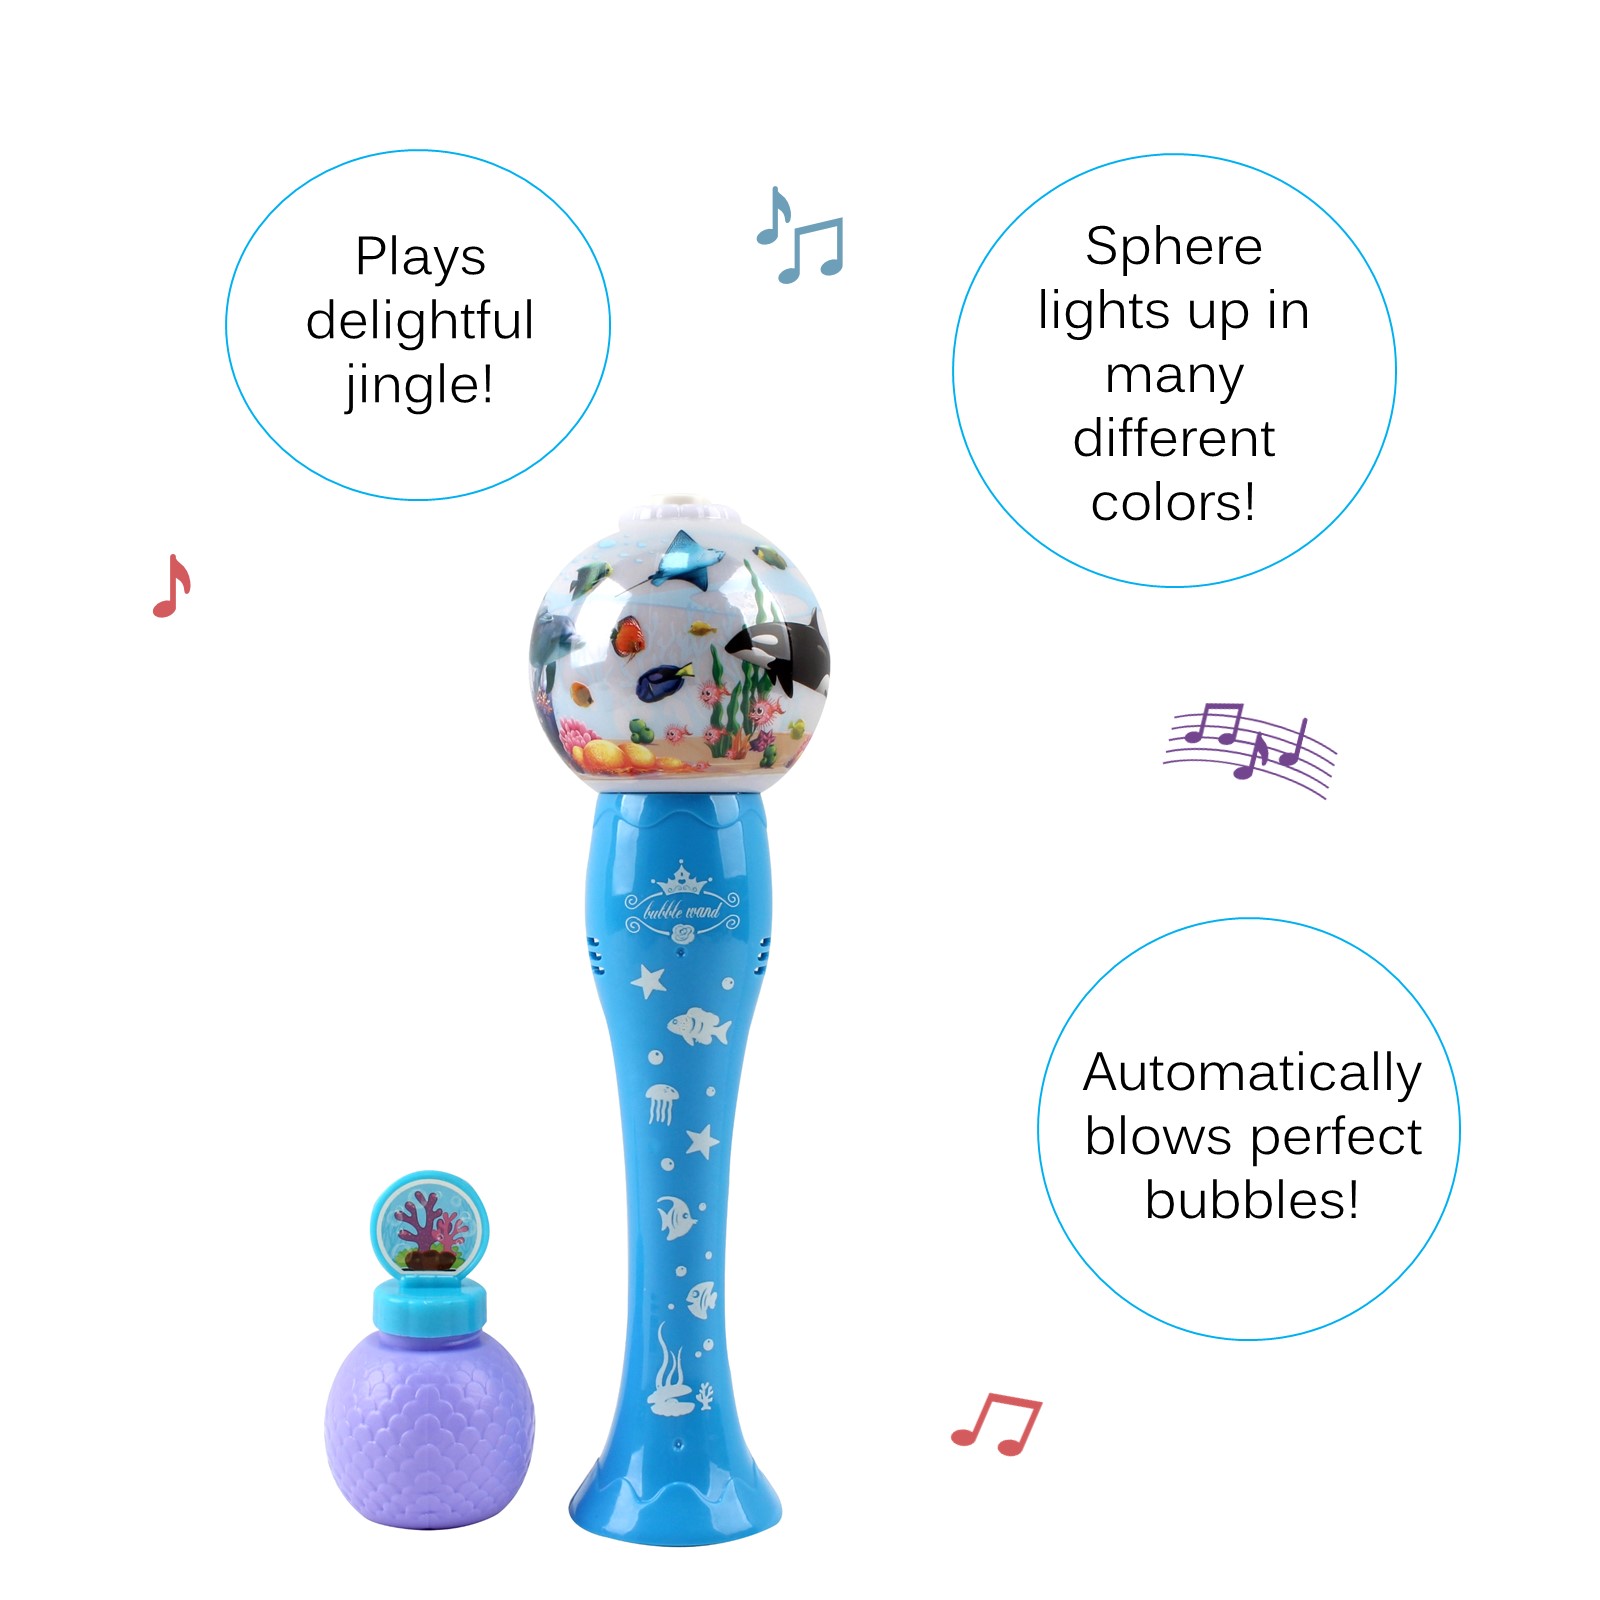 Orca Bubble Blower Dome Machine Automatically Shoots Over 500 Bubbles Per Minute With Light And Music Sea Creature Marine Animal Design Includes 2 Fluid Solutions Simple And Easy to Use Gun Toy For Boys Girls Toddlers Battery Operated TC-80